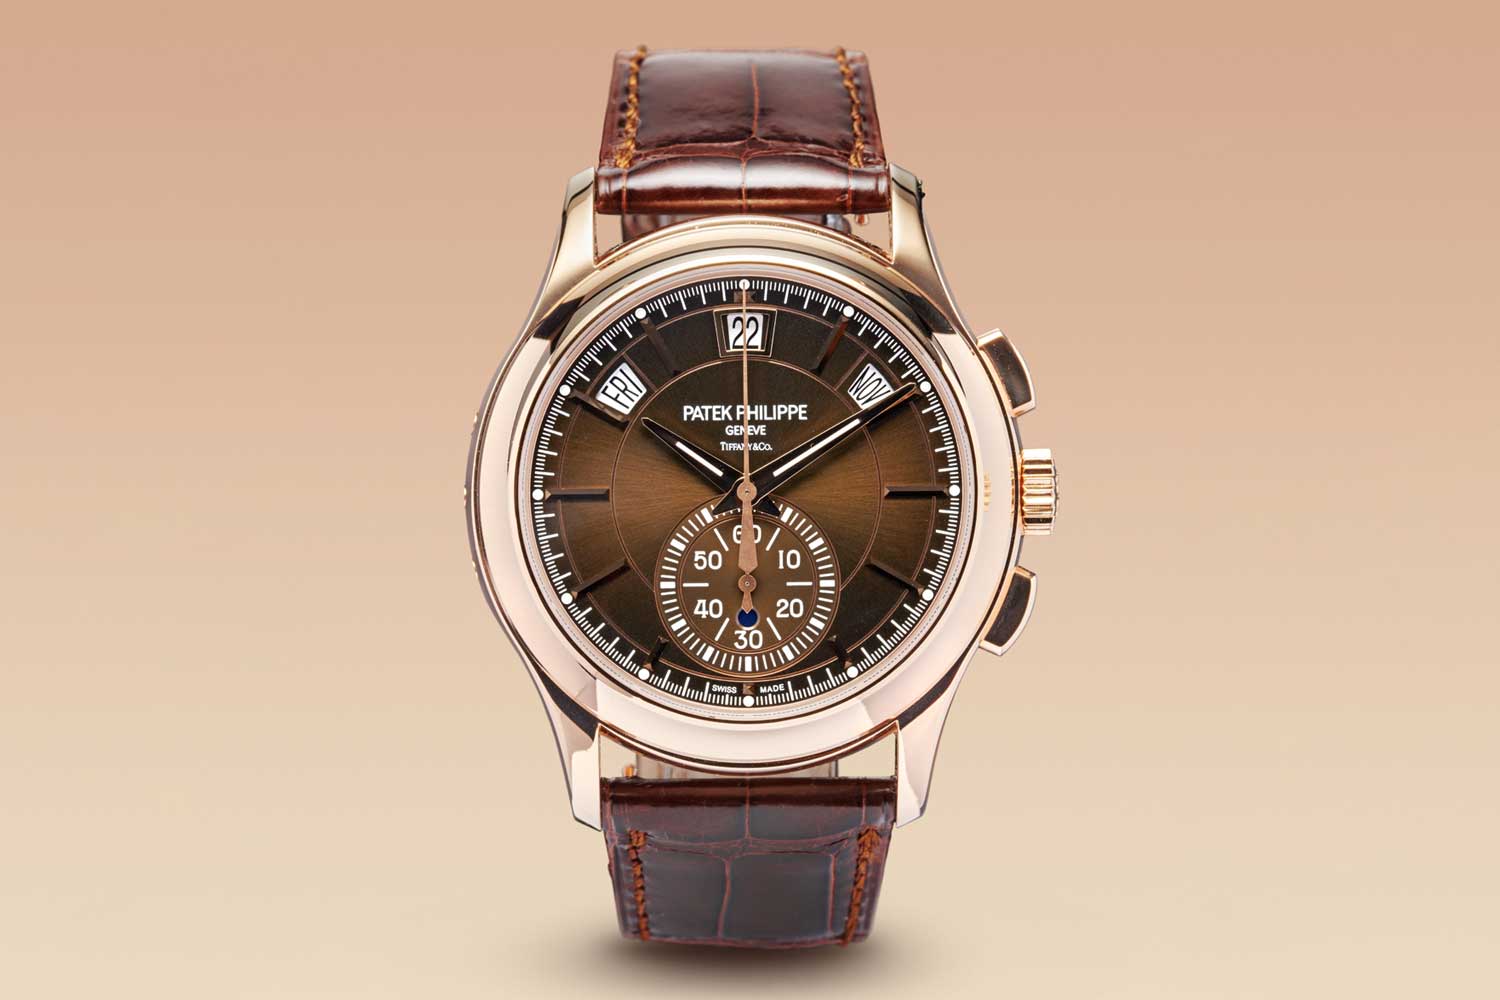 Lot 8: Patek Philippe Annual Calendar Chronograph with Tiffany dial, reference 5905R-001 (Image: Ineichen)